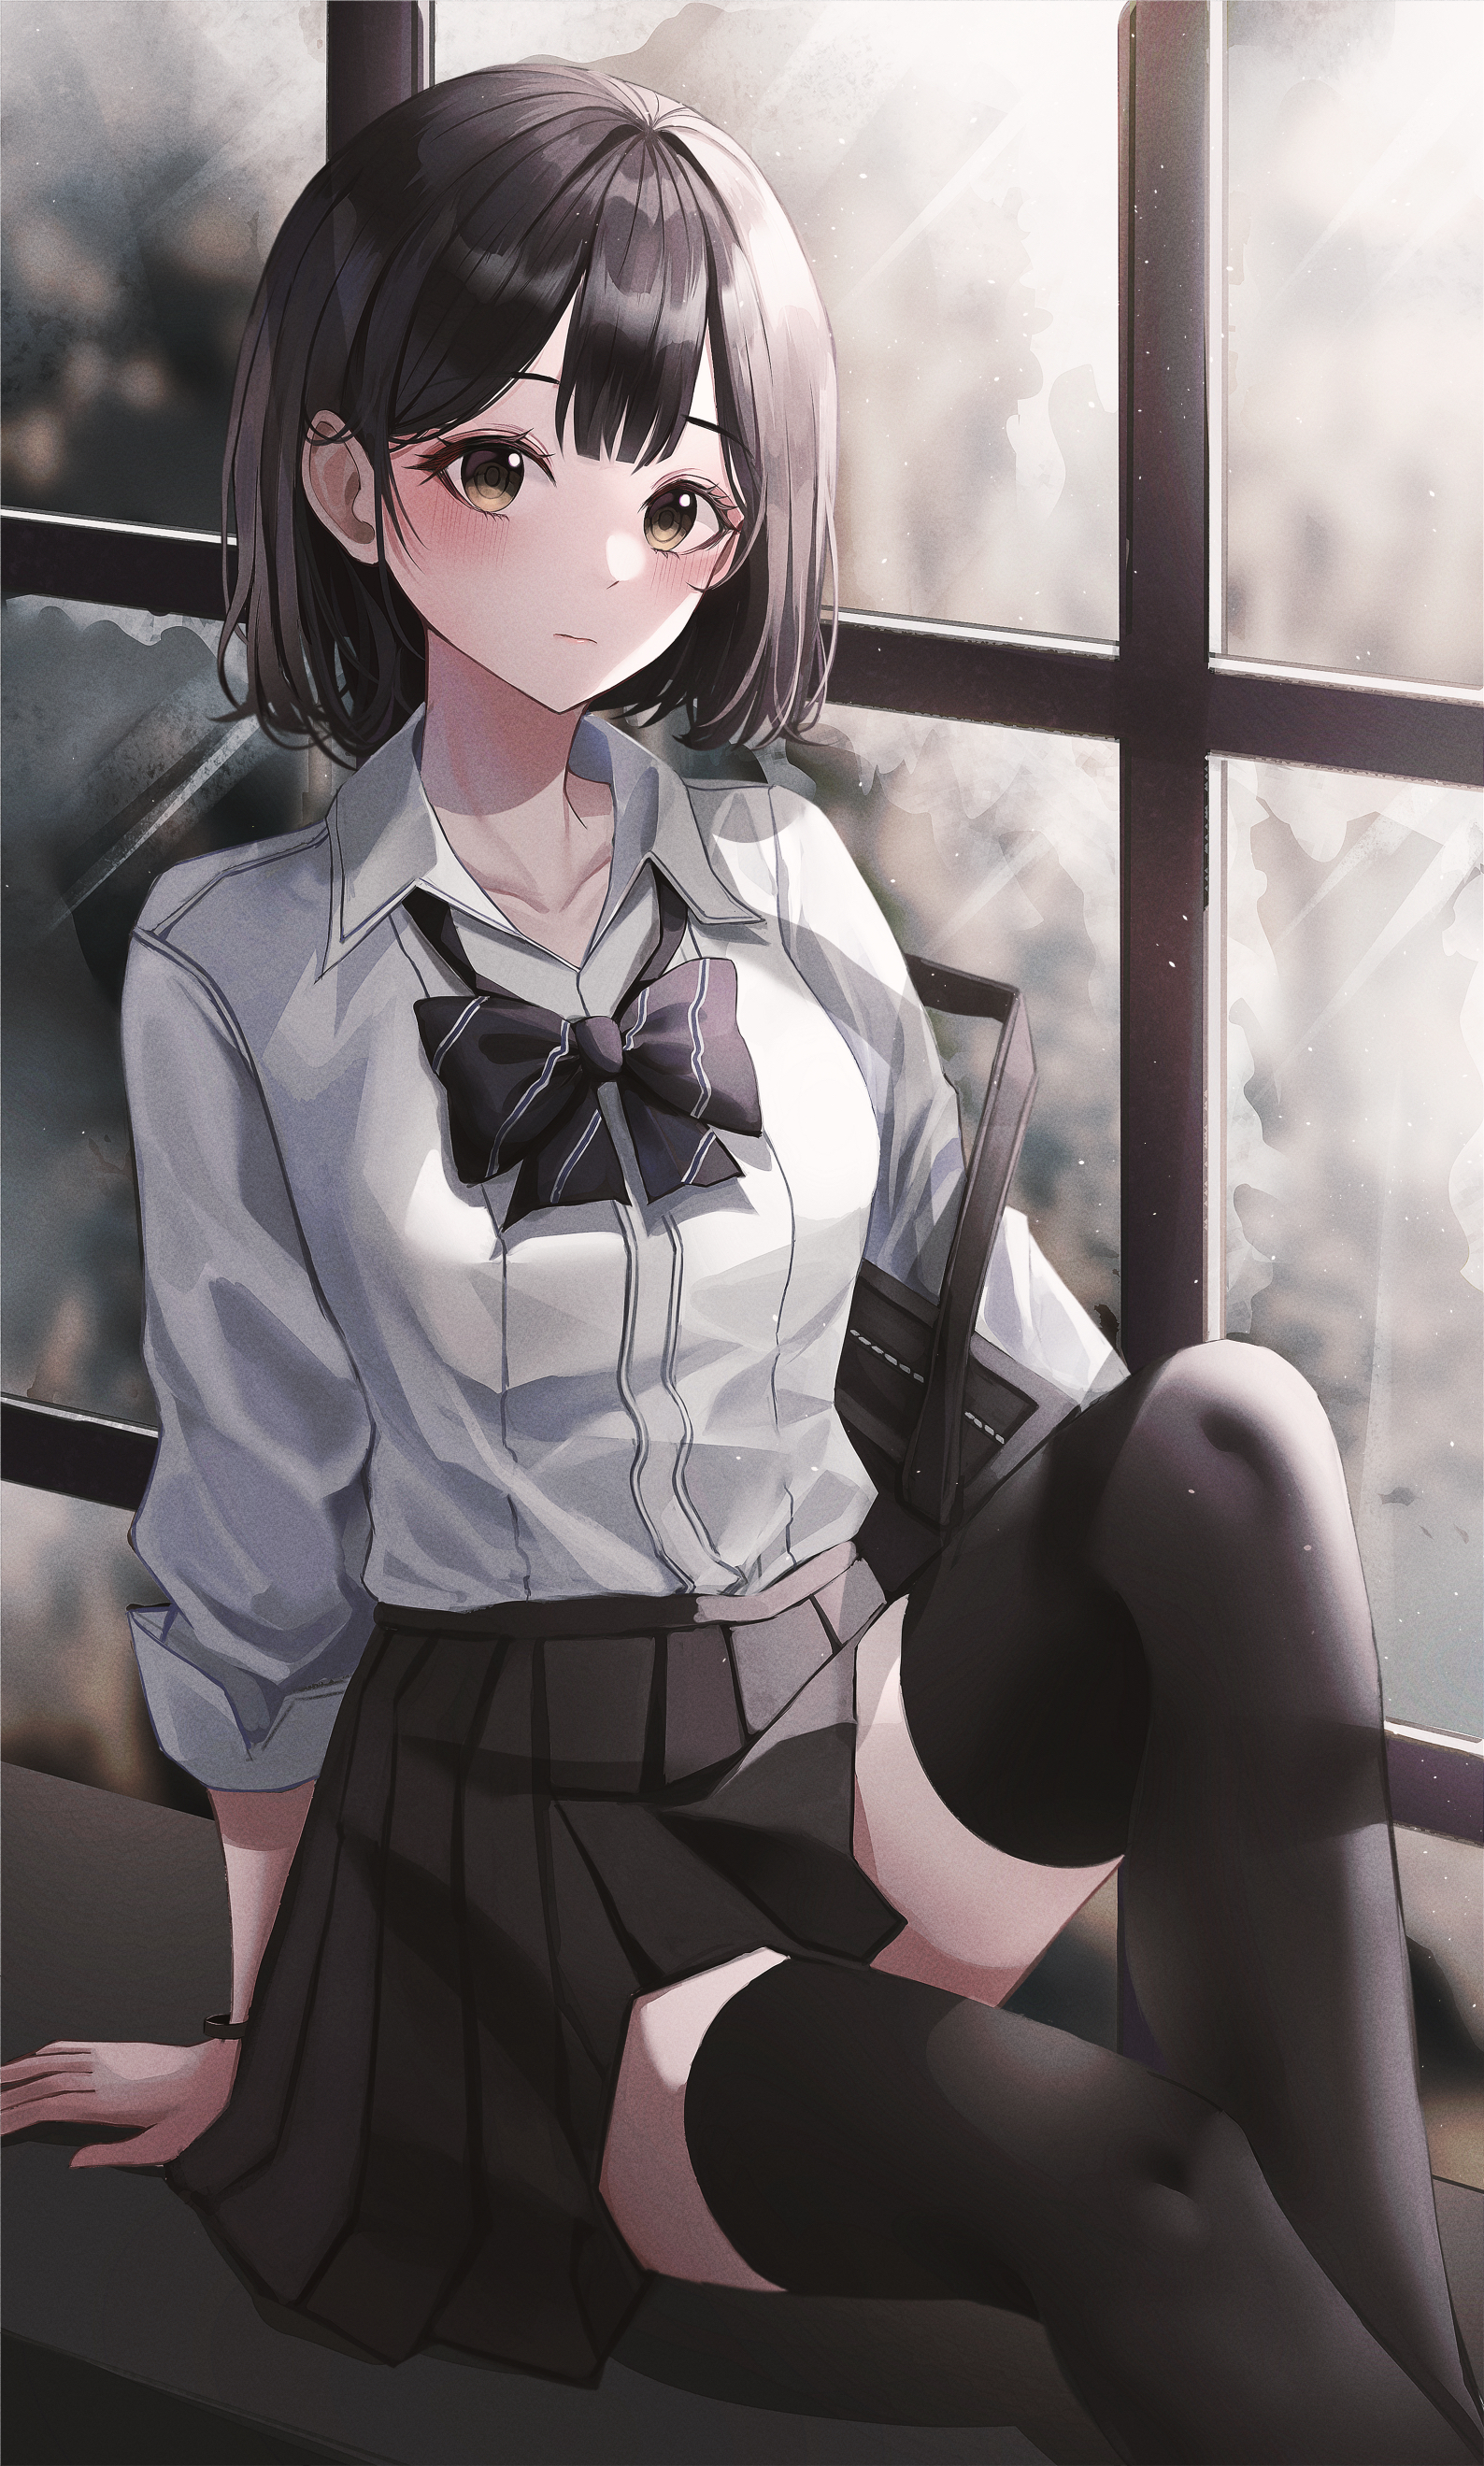 Fantasy Girl Anime Girls Black Hair By The Window Looking At Viewer White Shirt Necktie Black Skirts 1588x2639